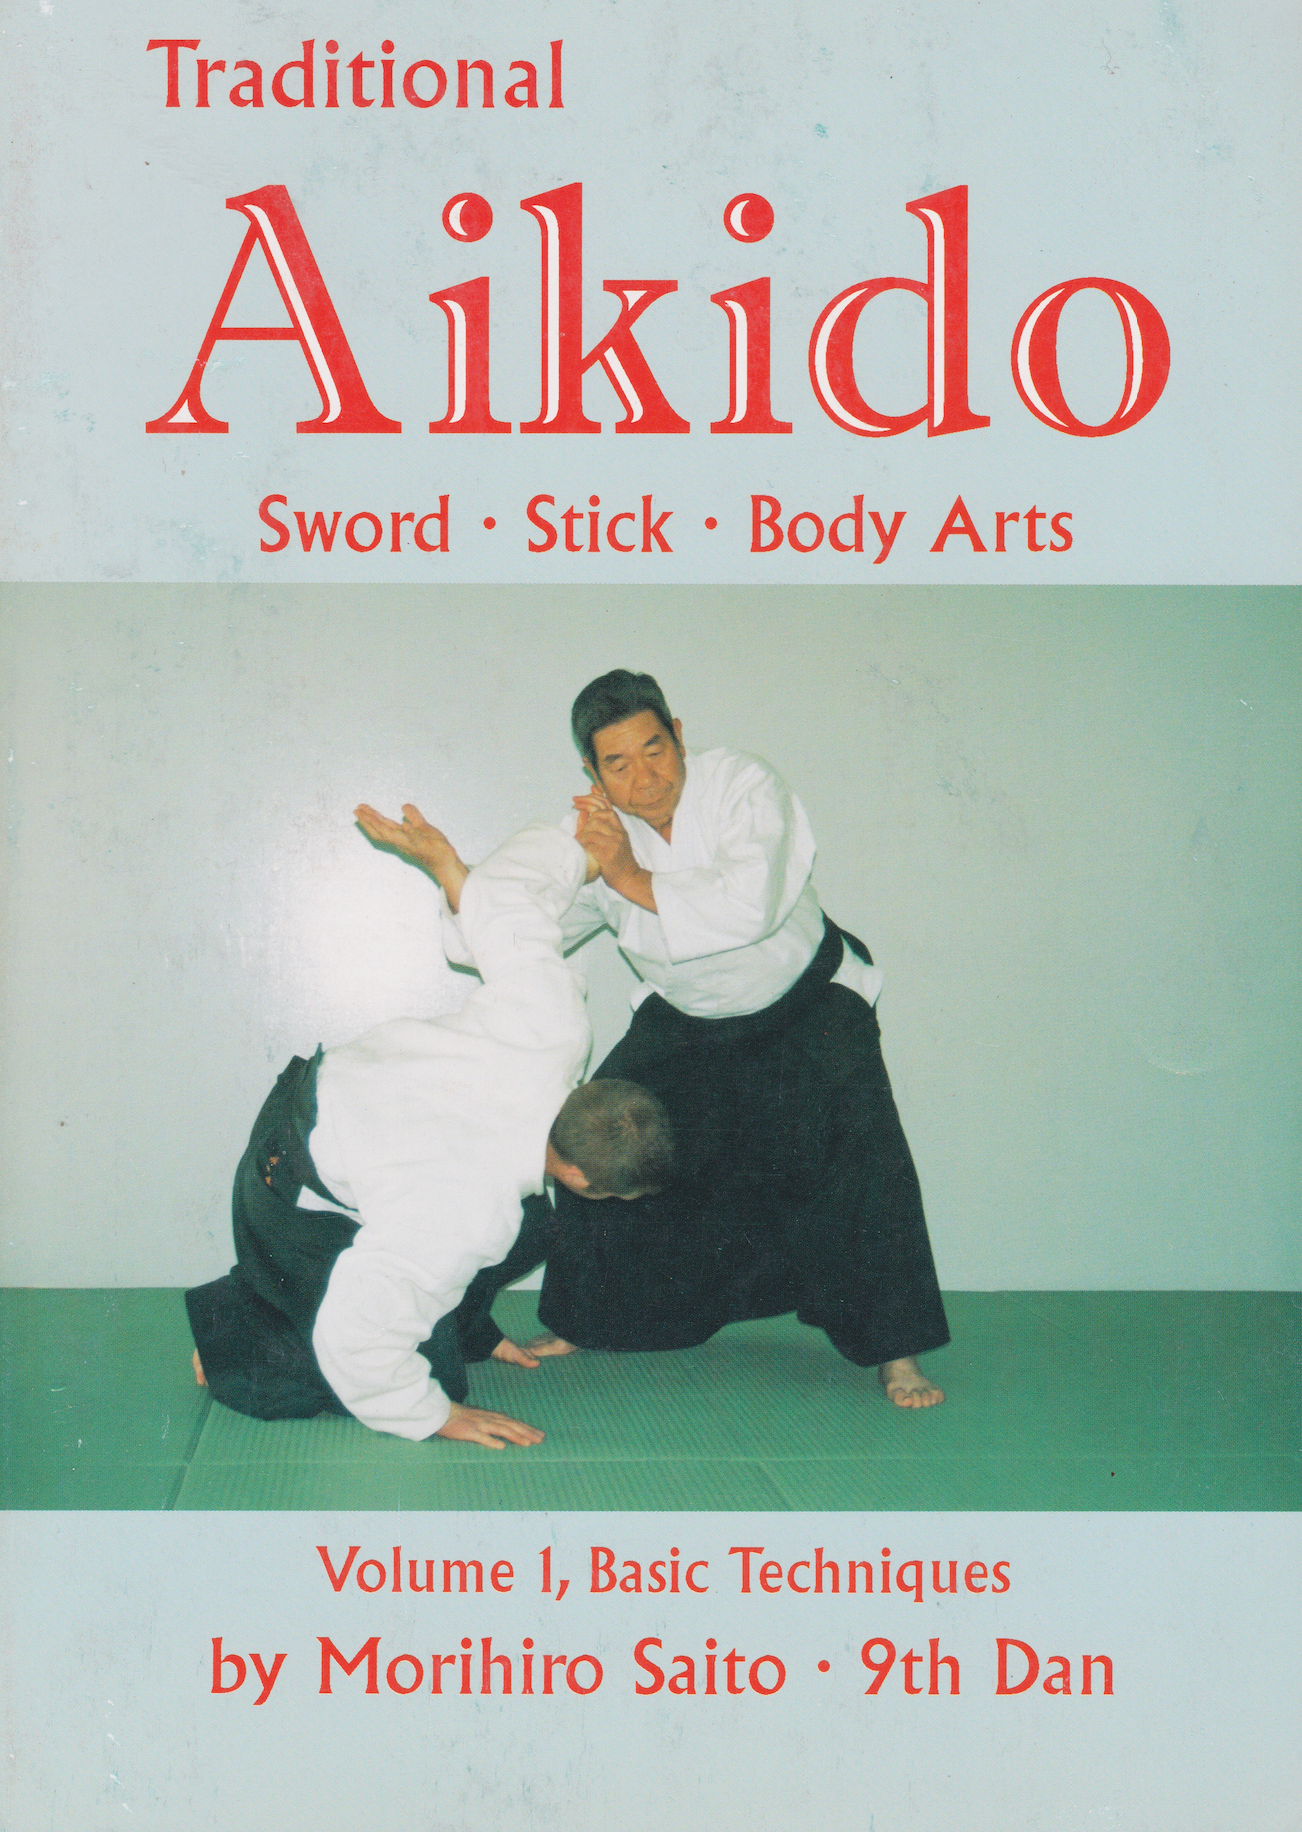 Traditional Aikido Complete 5 Book Set by Morihiro Saito (Preowned)